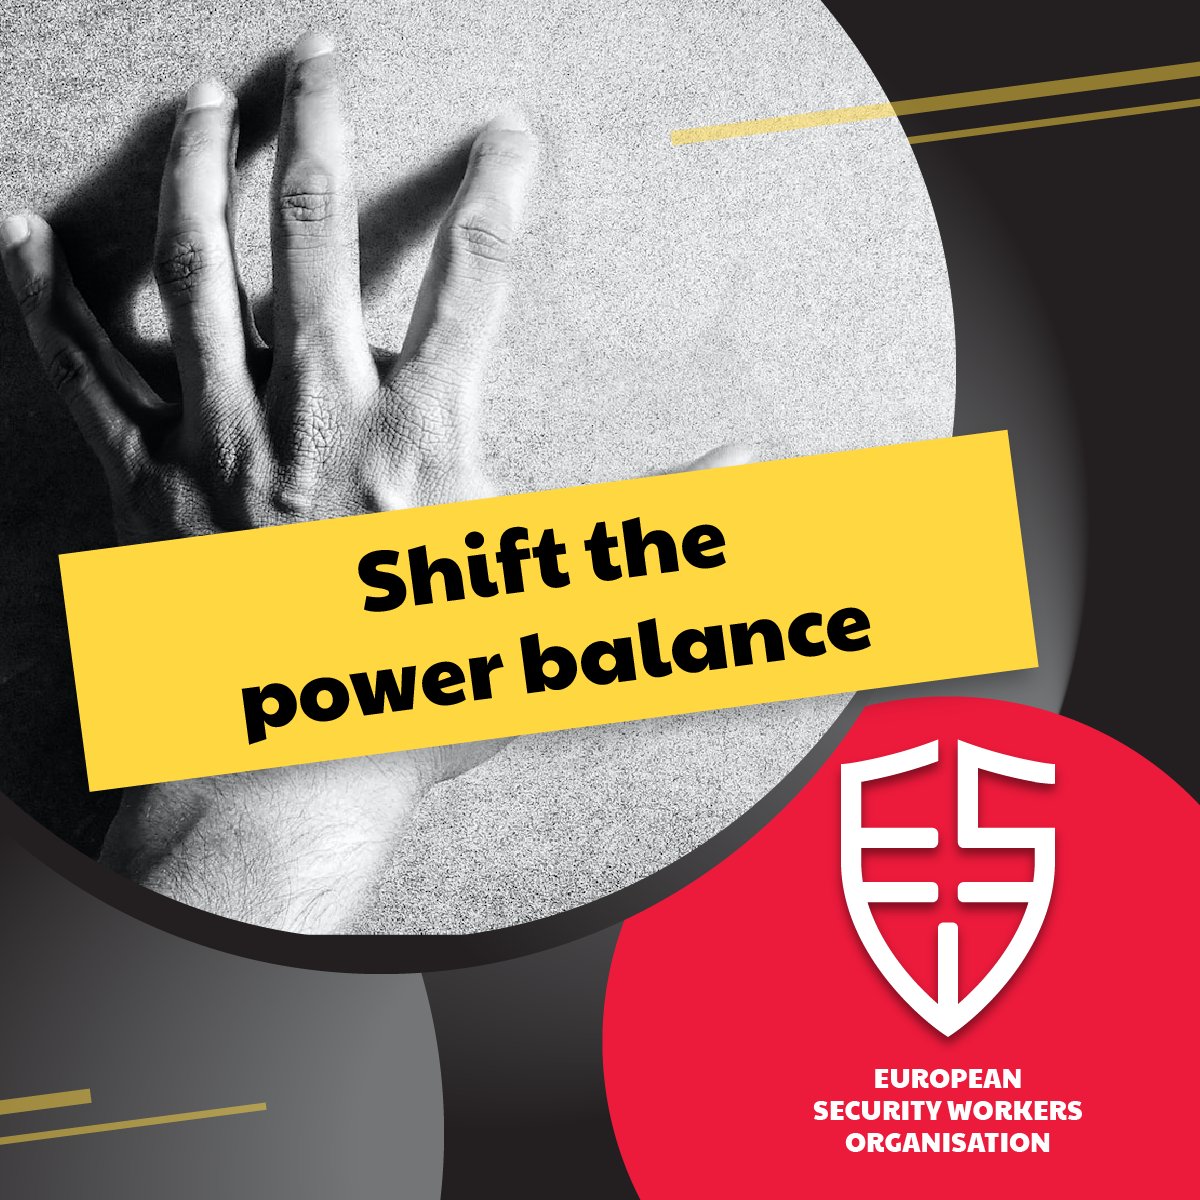 The power dynamics between employers and employees are changing rapidly. In the European security sector, the boss-worker power struggle is being addressed through organizations like ESW. #SecurityWorkers #PowerStruggle